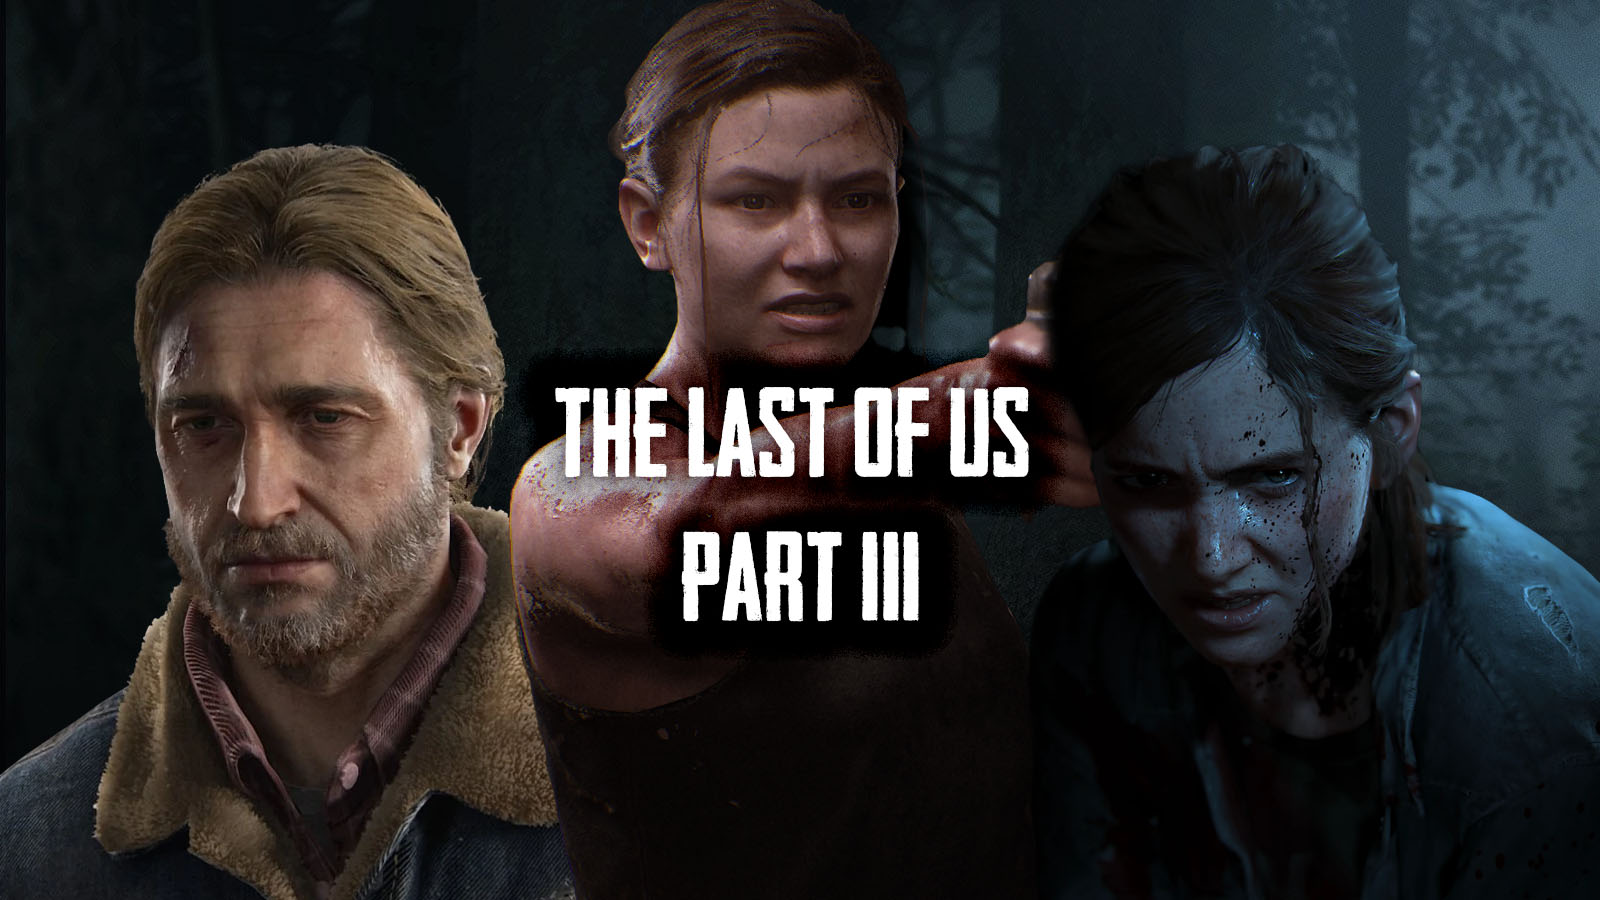 The Last Of Us Part 3 may accidentally confirmed